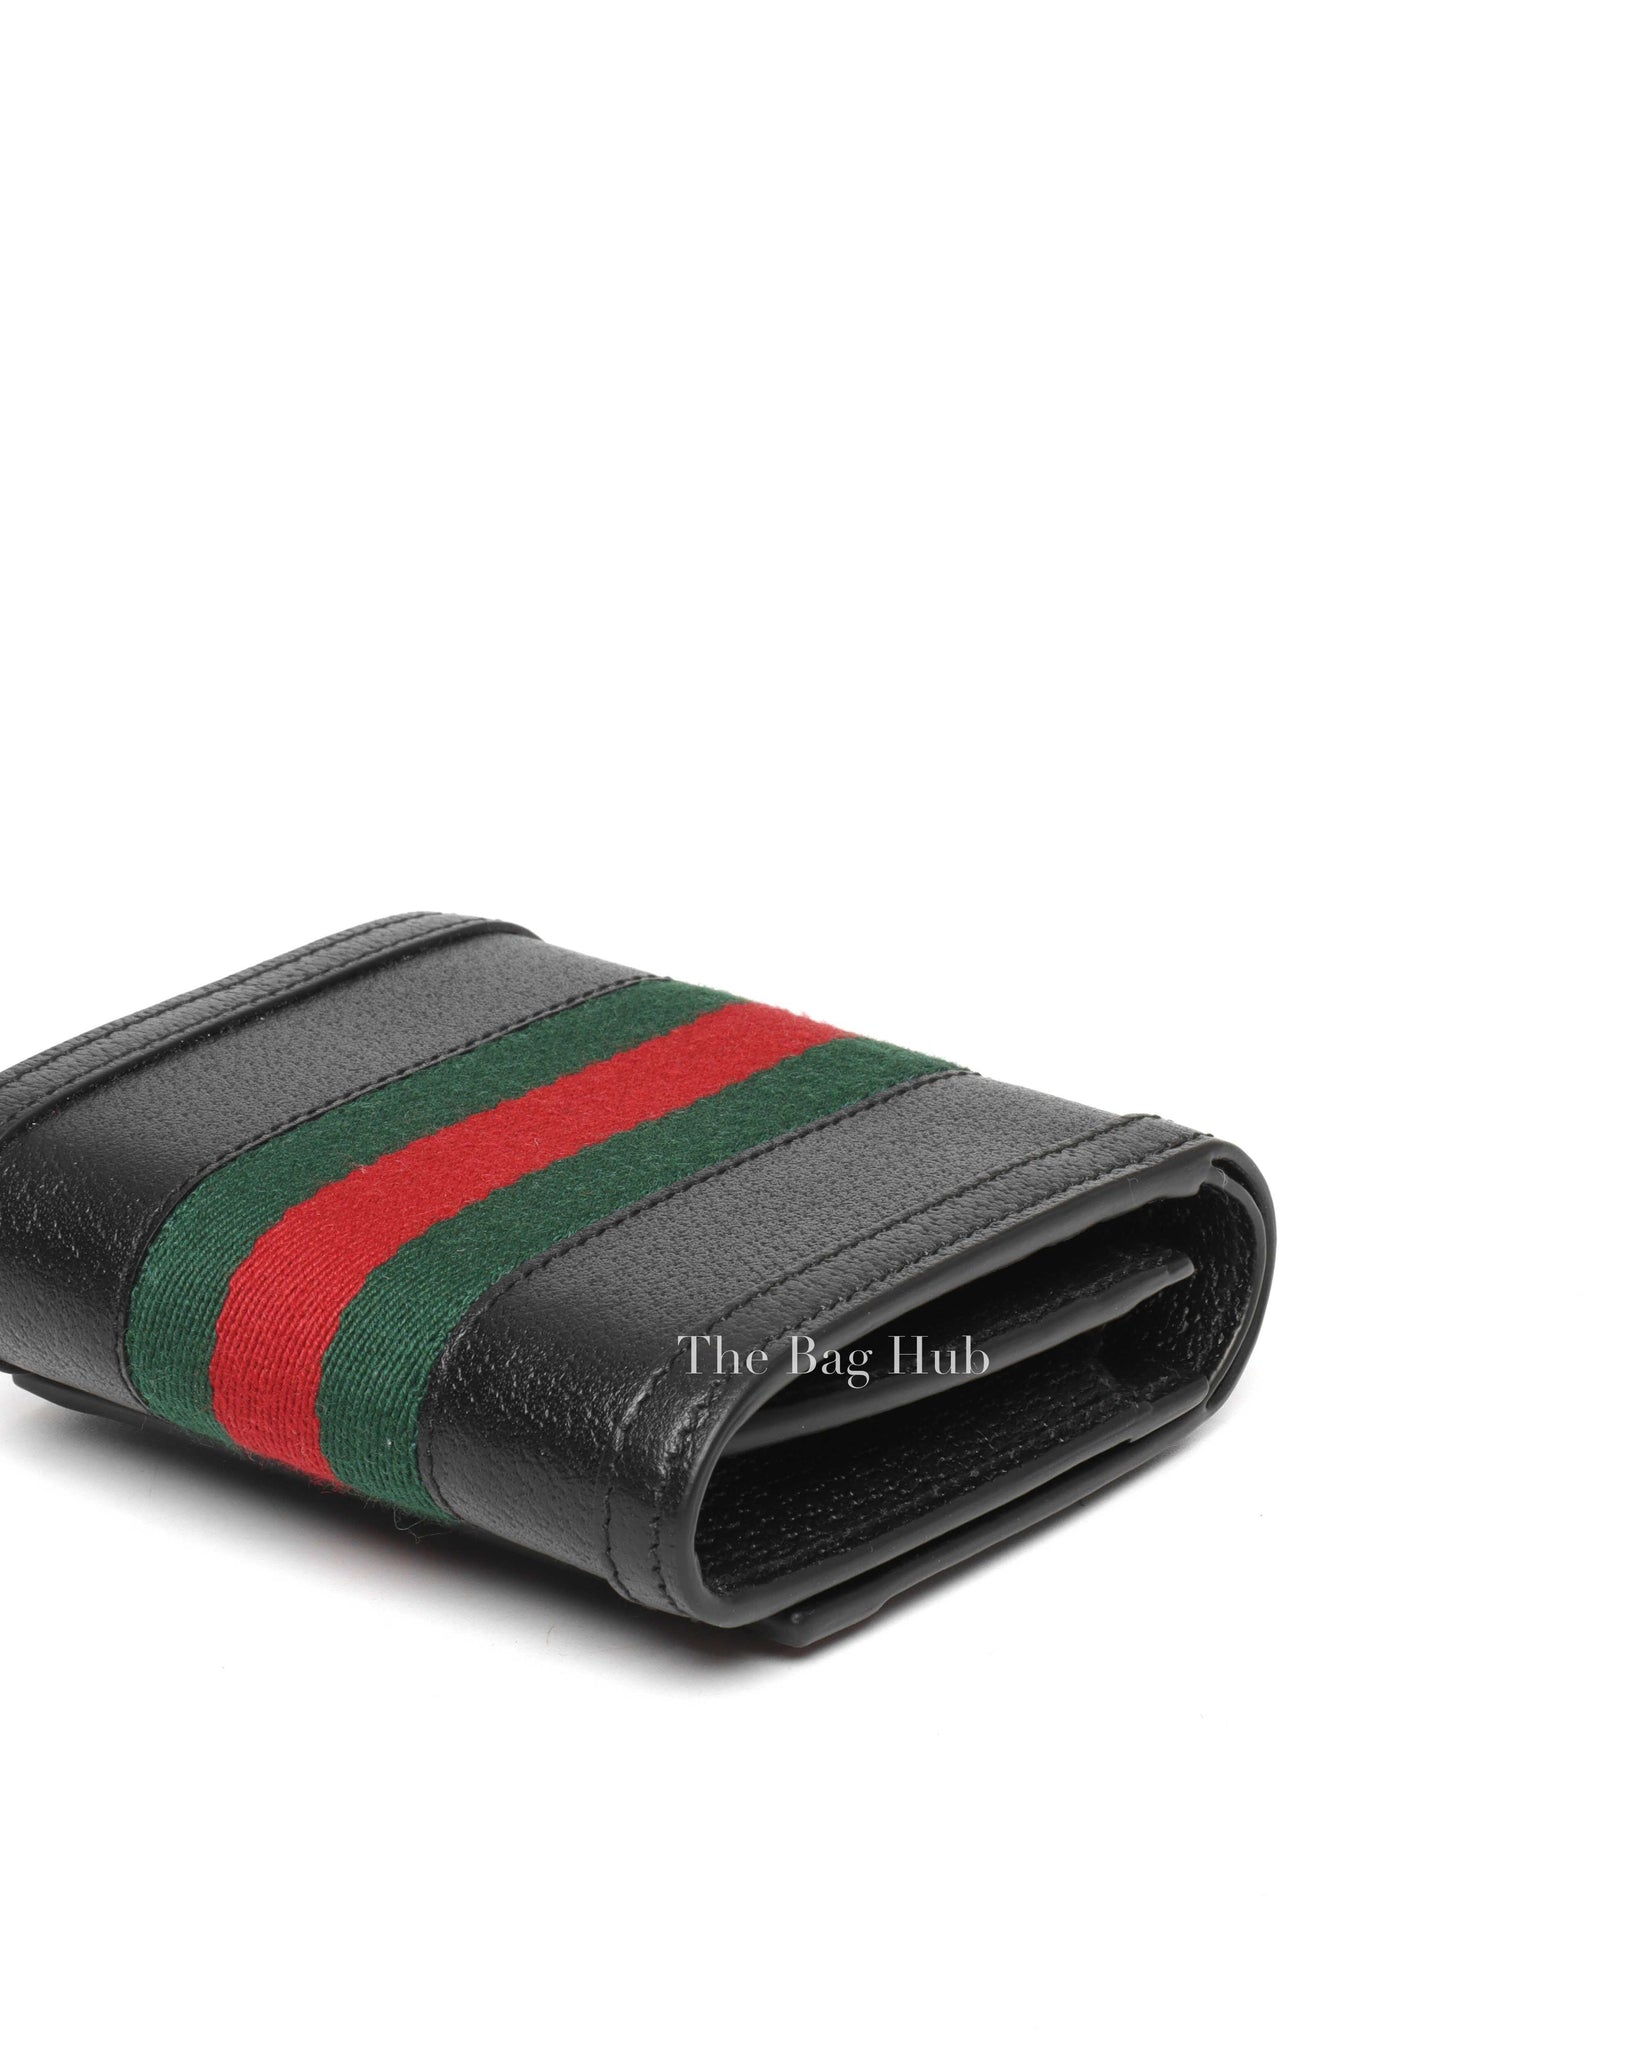 Gucci Black Ophidia GG Leather Wallet